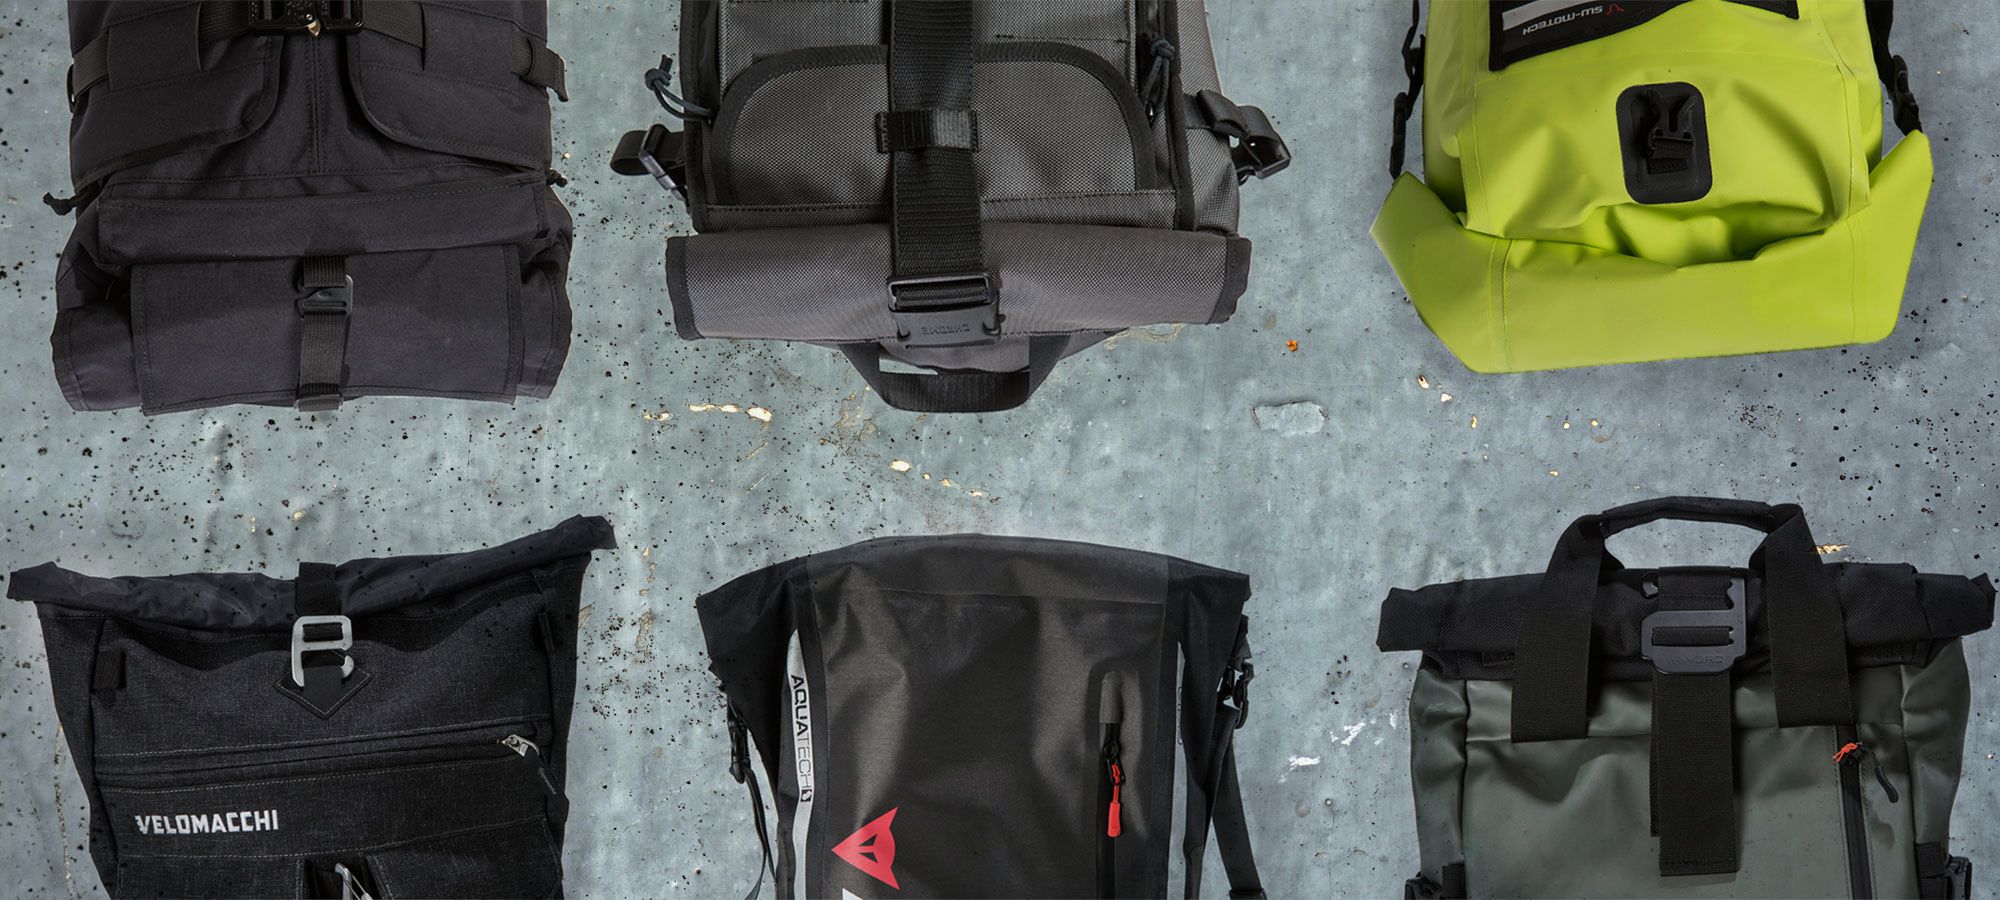 6 Roll-Top Backpacks Designed For Motorcycle Riding | Motorcyclist